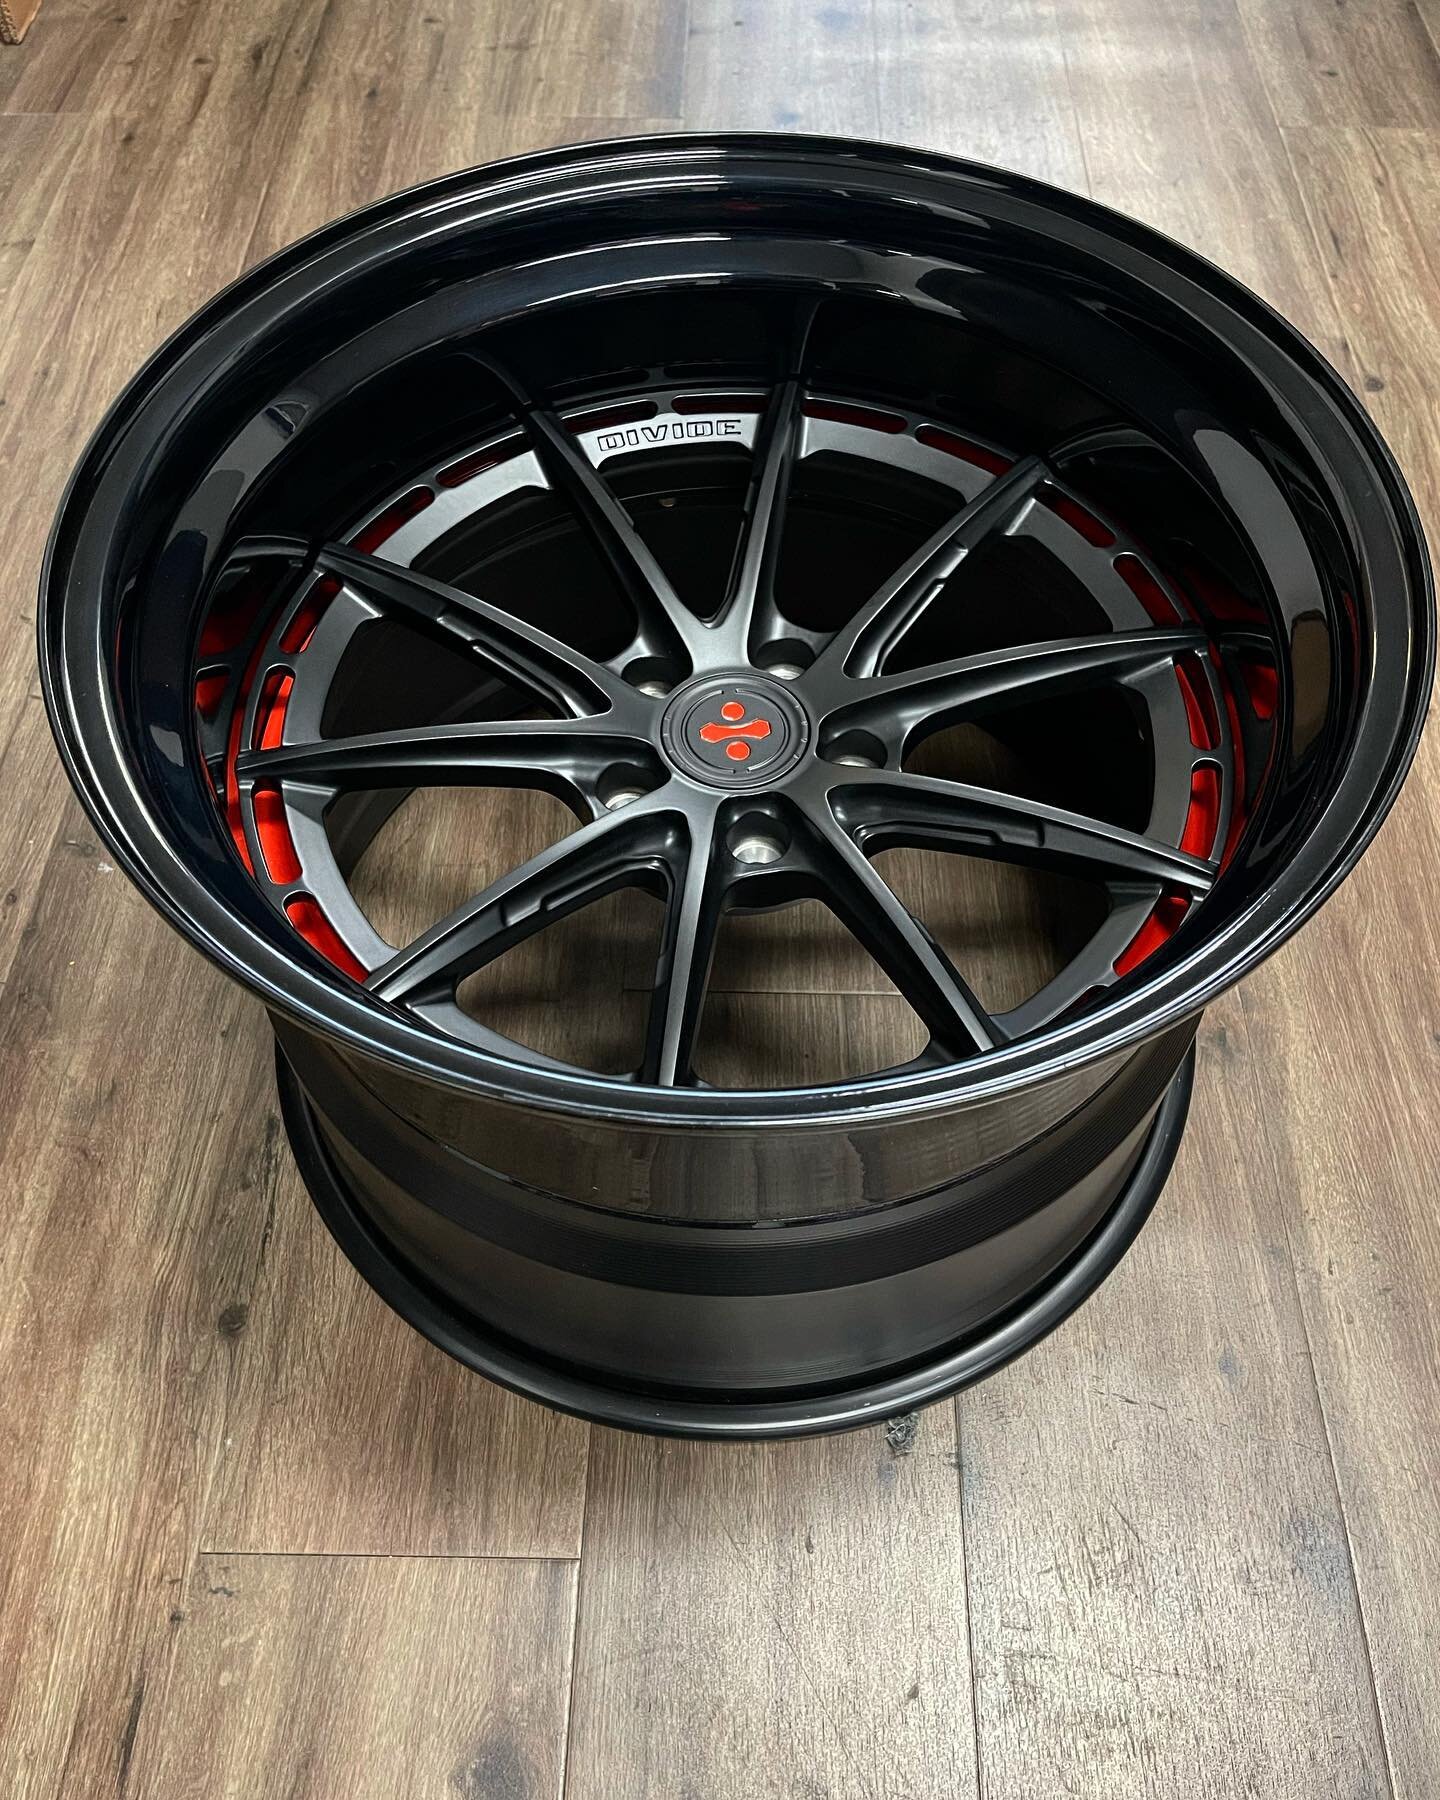 DVF01 3pcs 
Custom color inner ring availble.
&ldquo;Divided fron the rest&rdquo;
Now availble in 18-24 forged monoblock 
Built to order -6 week build time. 

#divideforged #dividewheels #newwheeldesigns #dvf01 #forgedwheels
#takingover #wetakingover